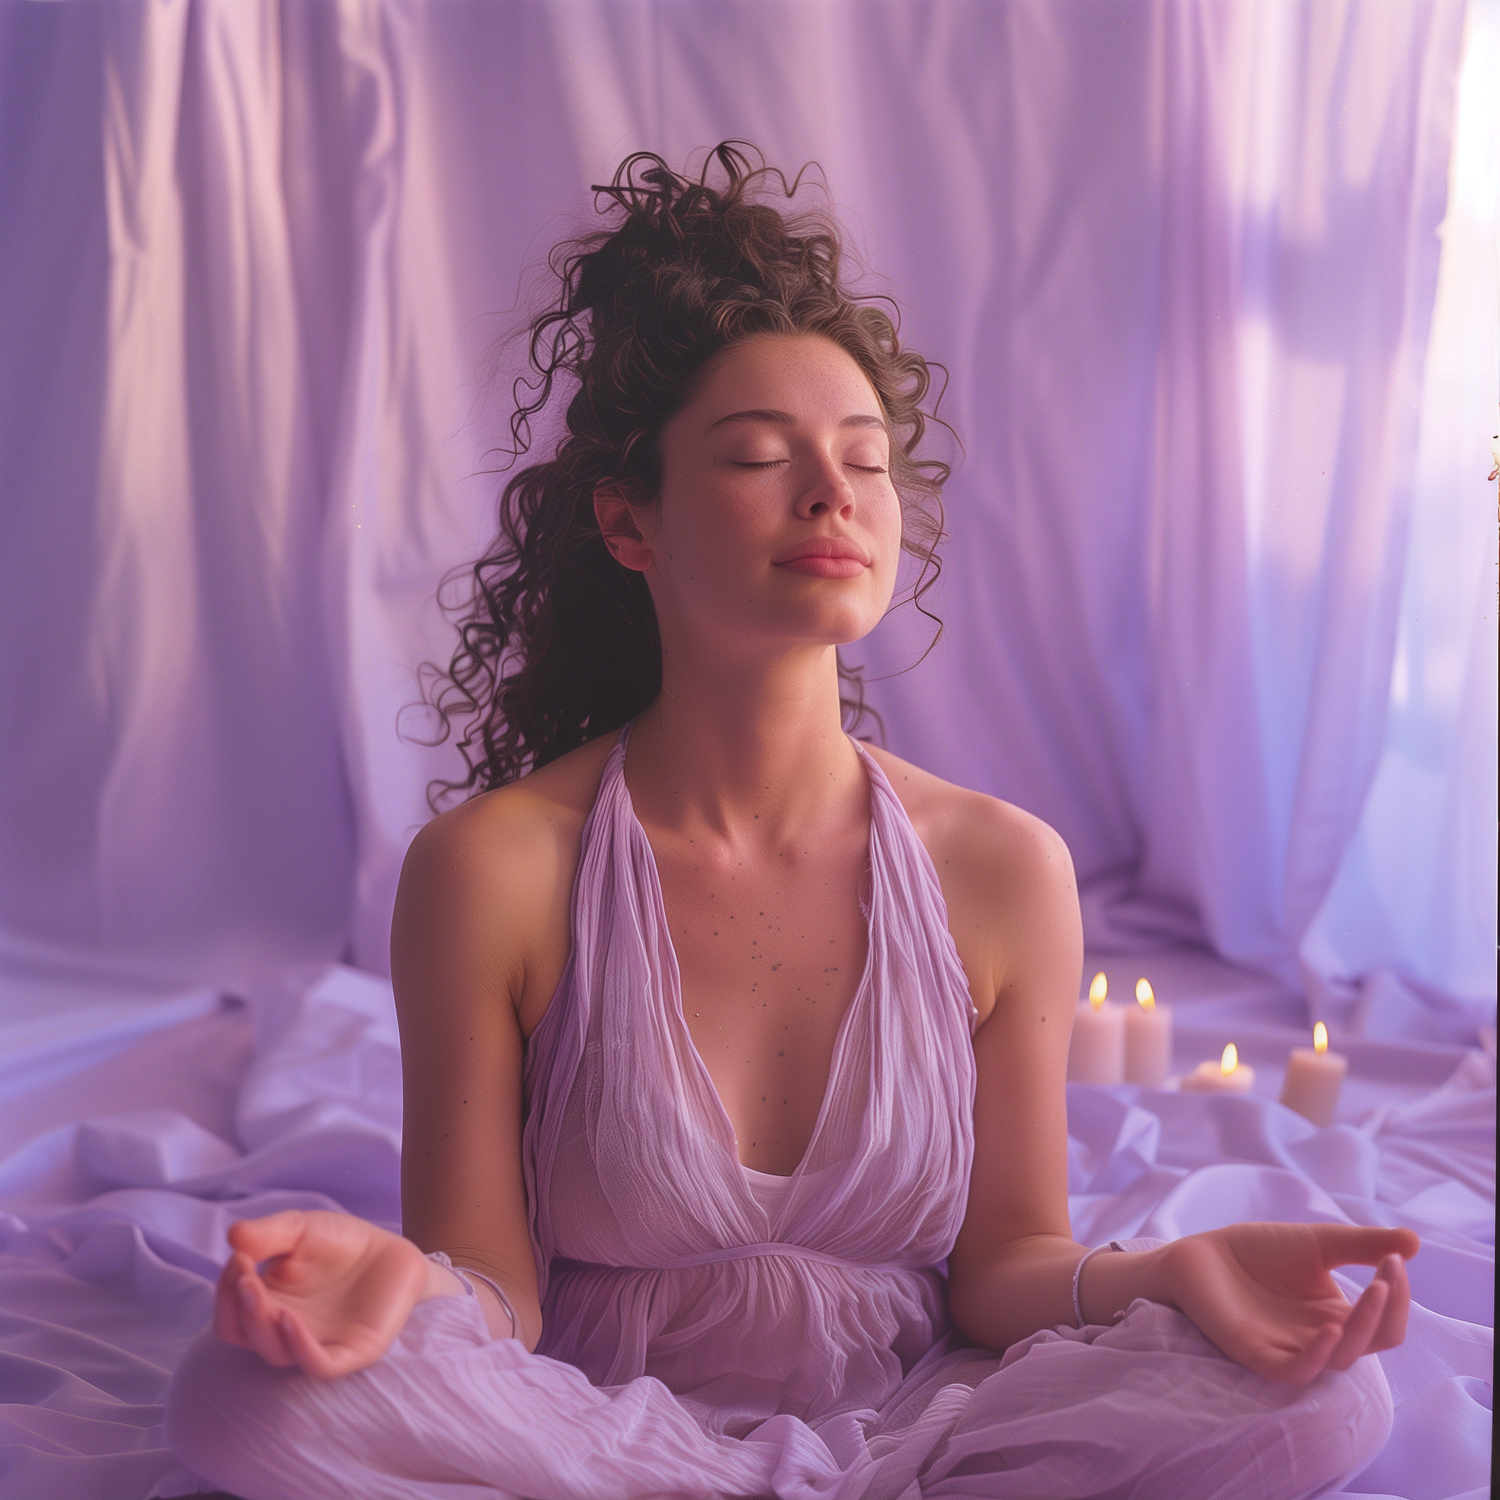 a_woman_relaxed_happy_meditating_home_spa